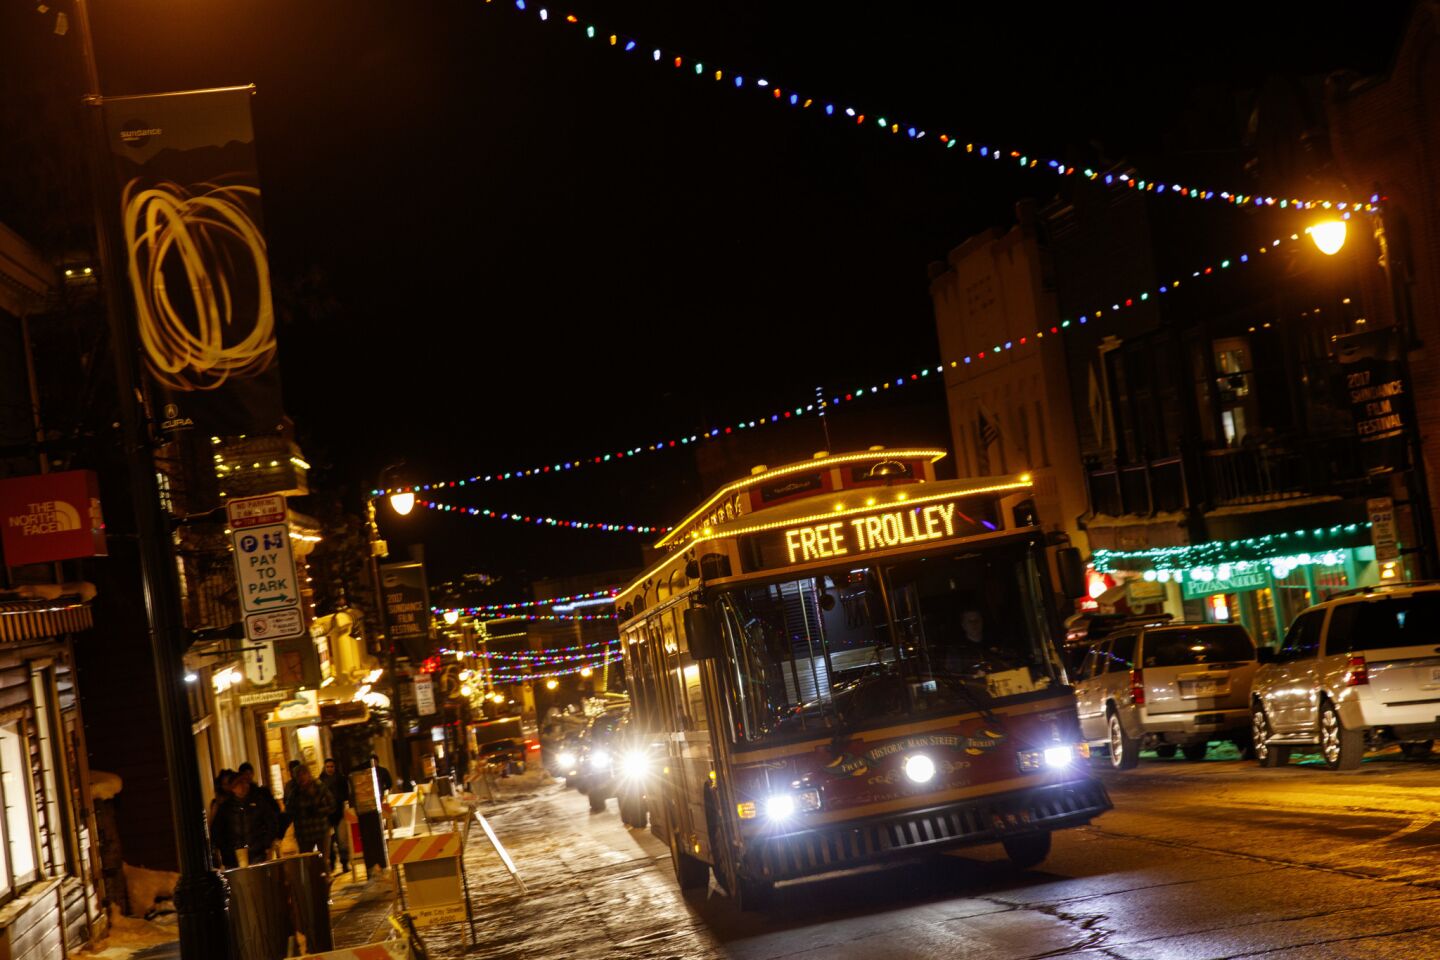 A trolley rolls up Main Street in Park City, Utah, as the Sundance Film Festival approached.